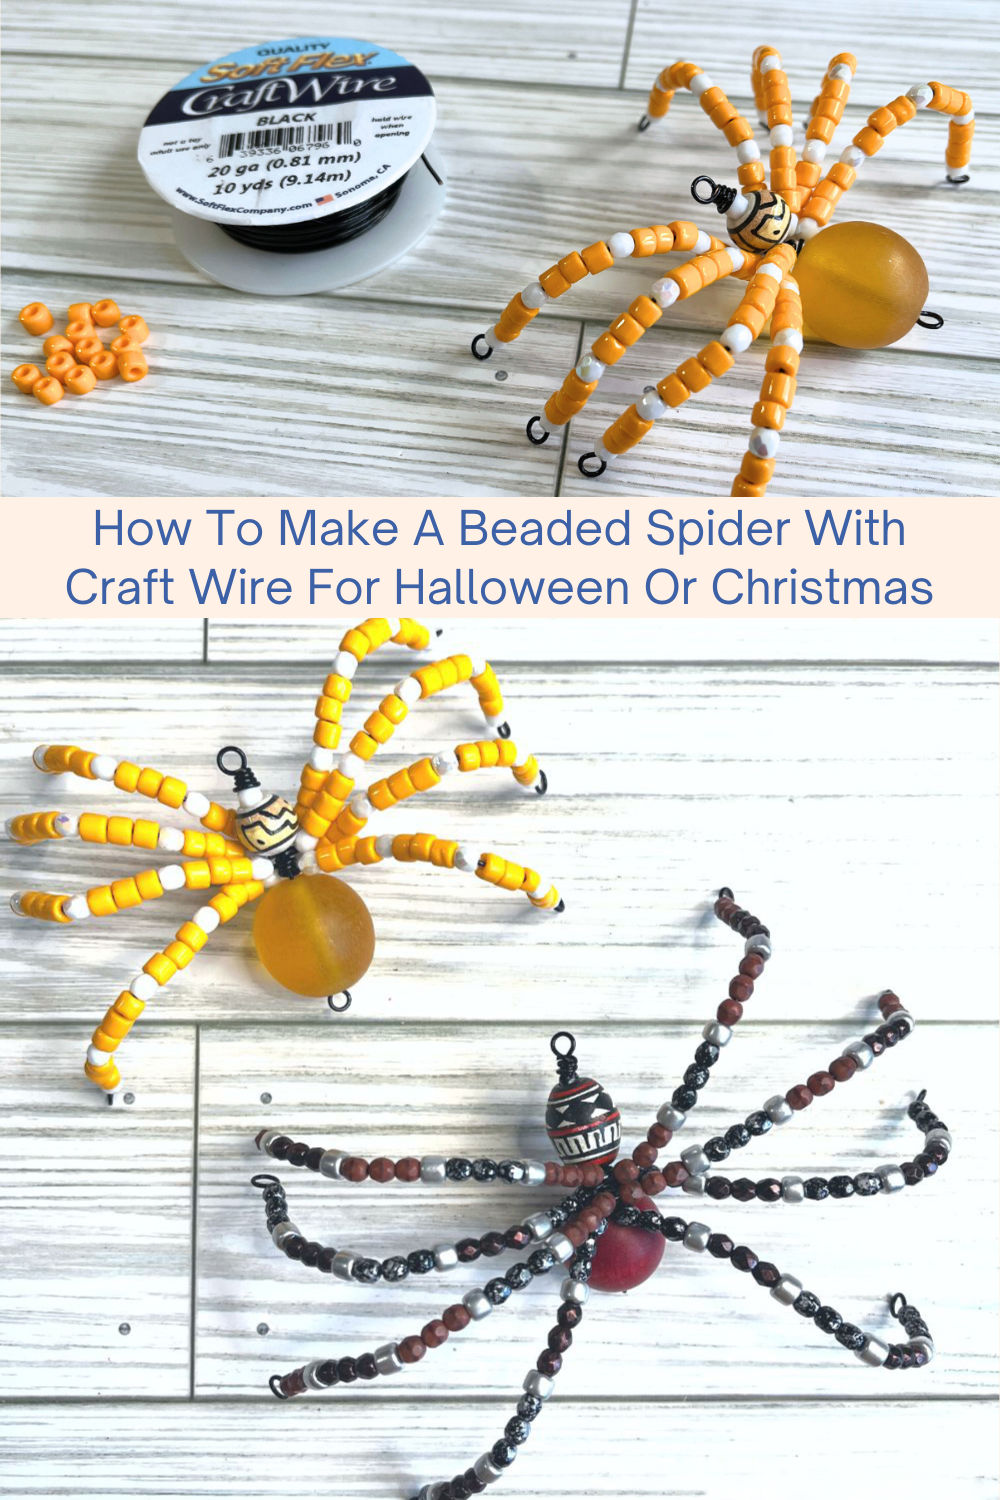 How To Make A Beaded Spider With Craft Wire For Halloween Or Christmas Collage